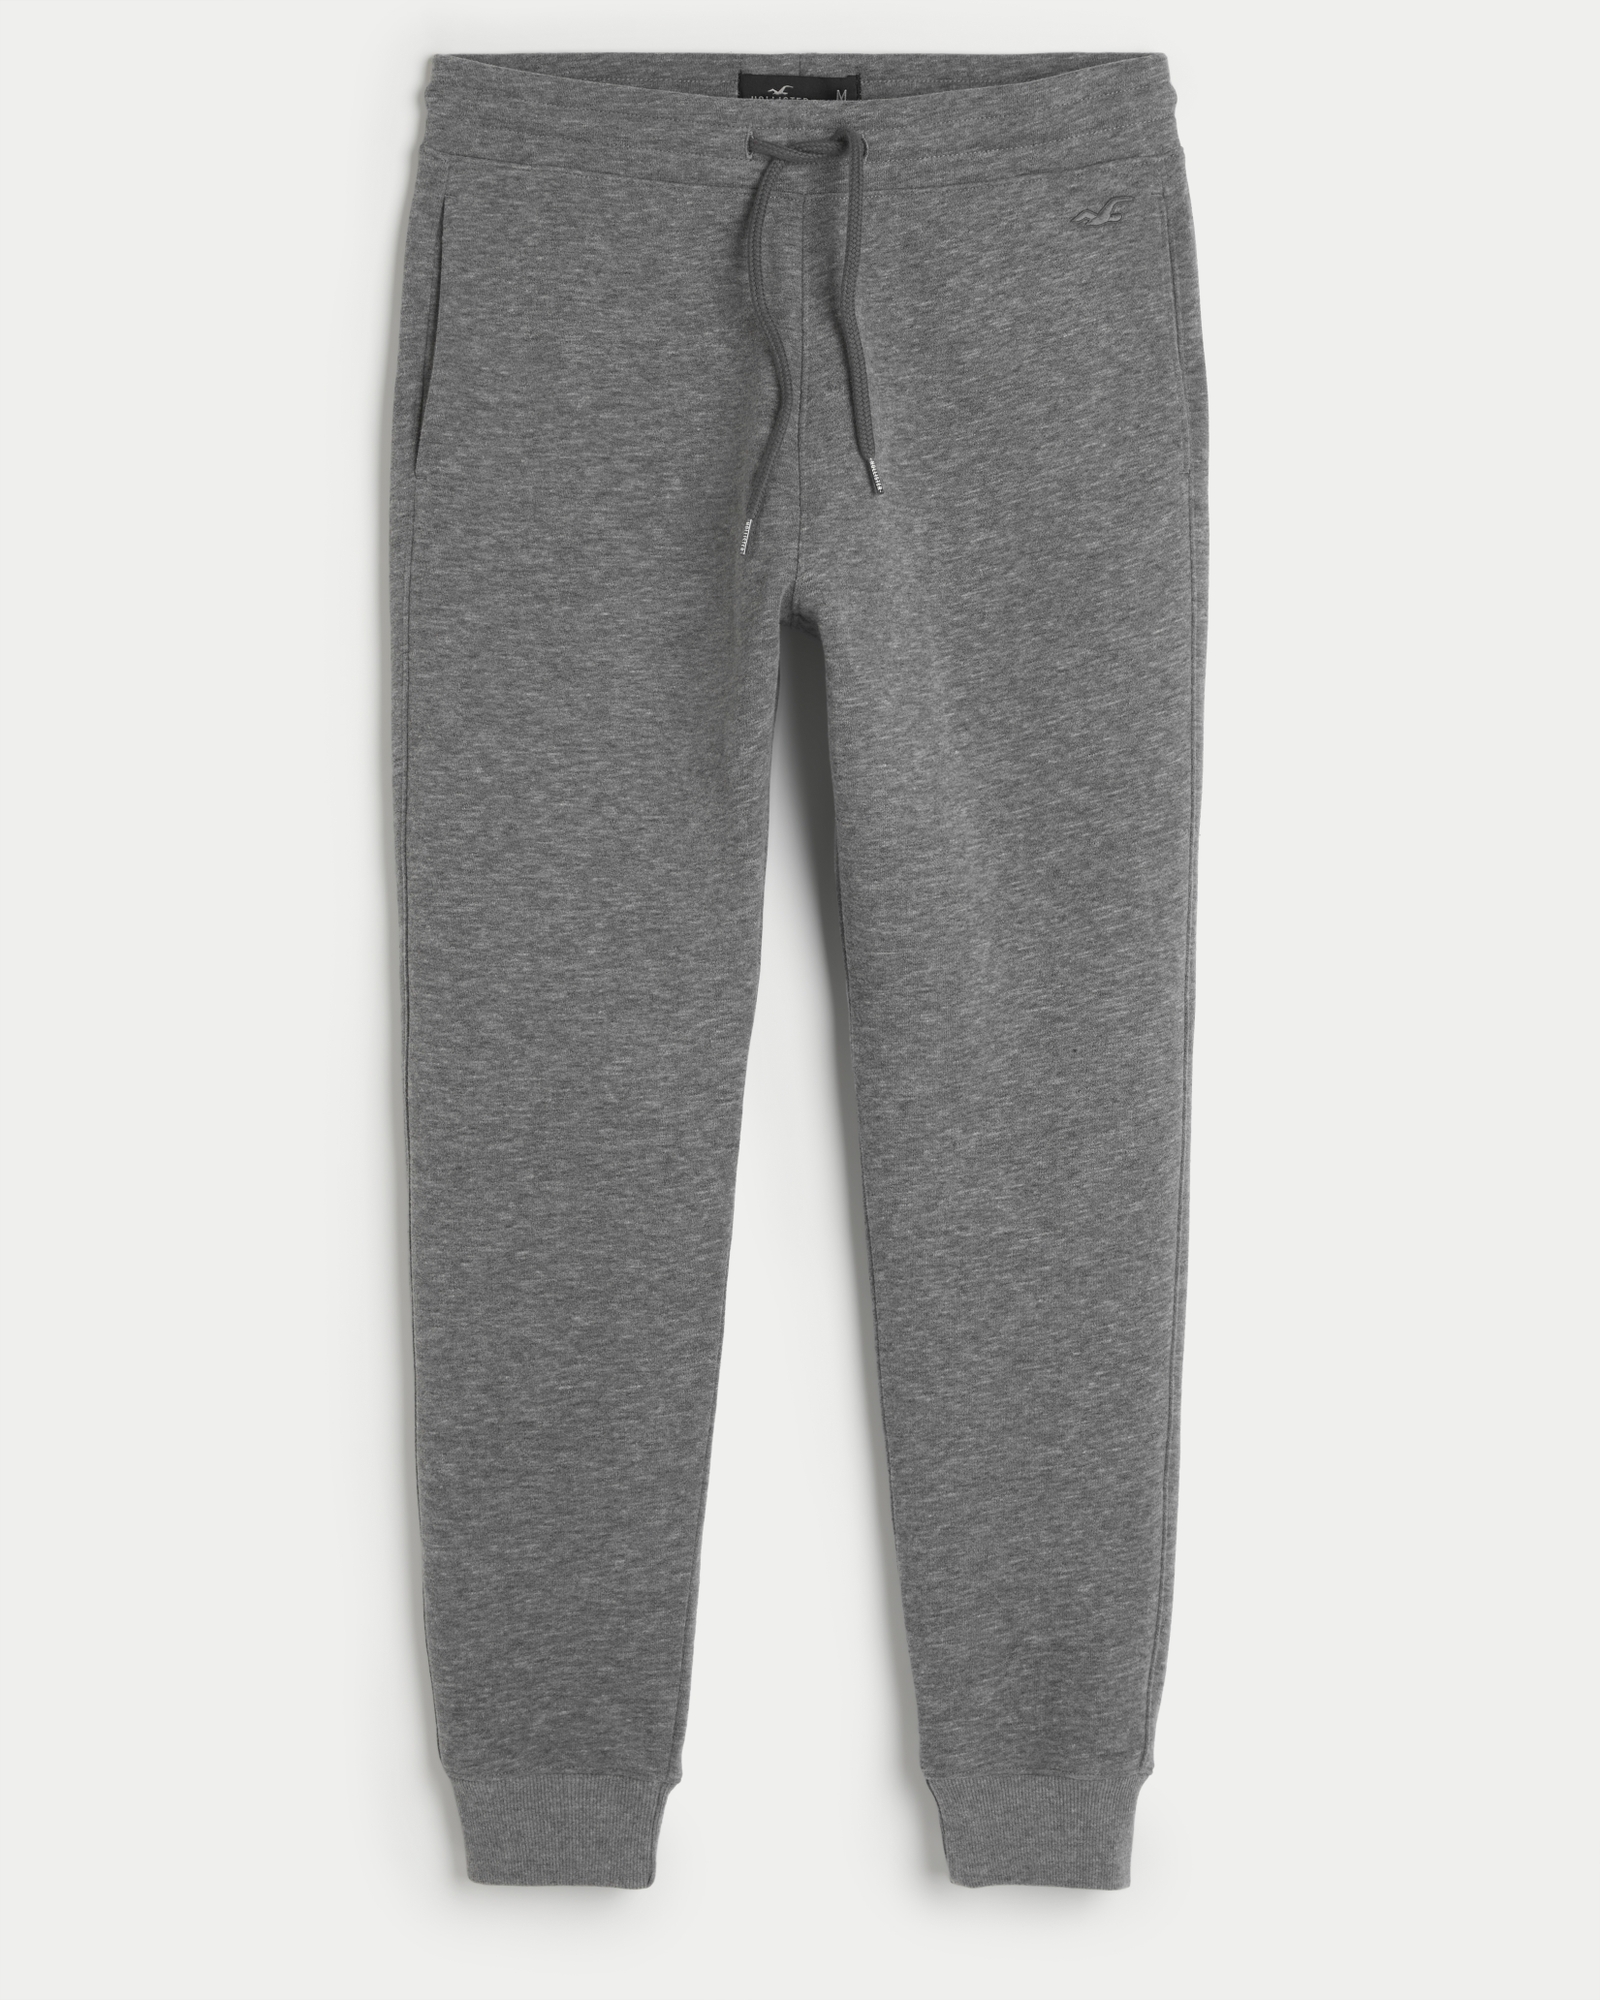 Ready to fleece joggers in graphite grey, size 8. I'm so glad I